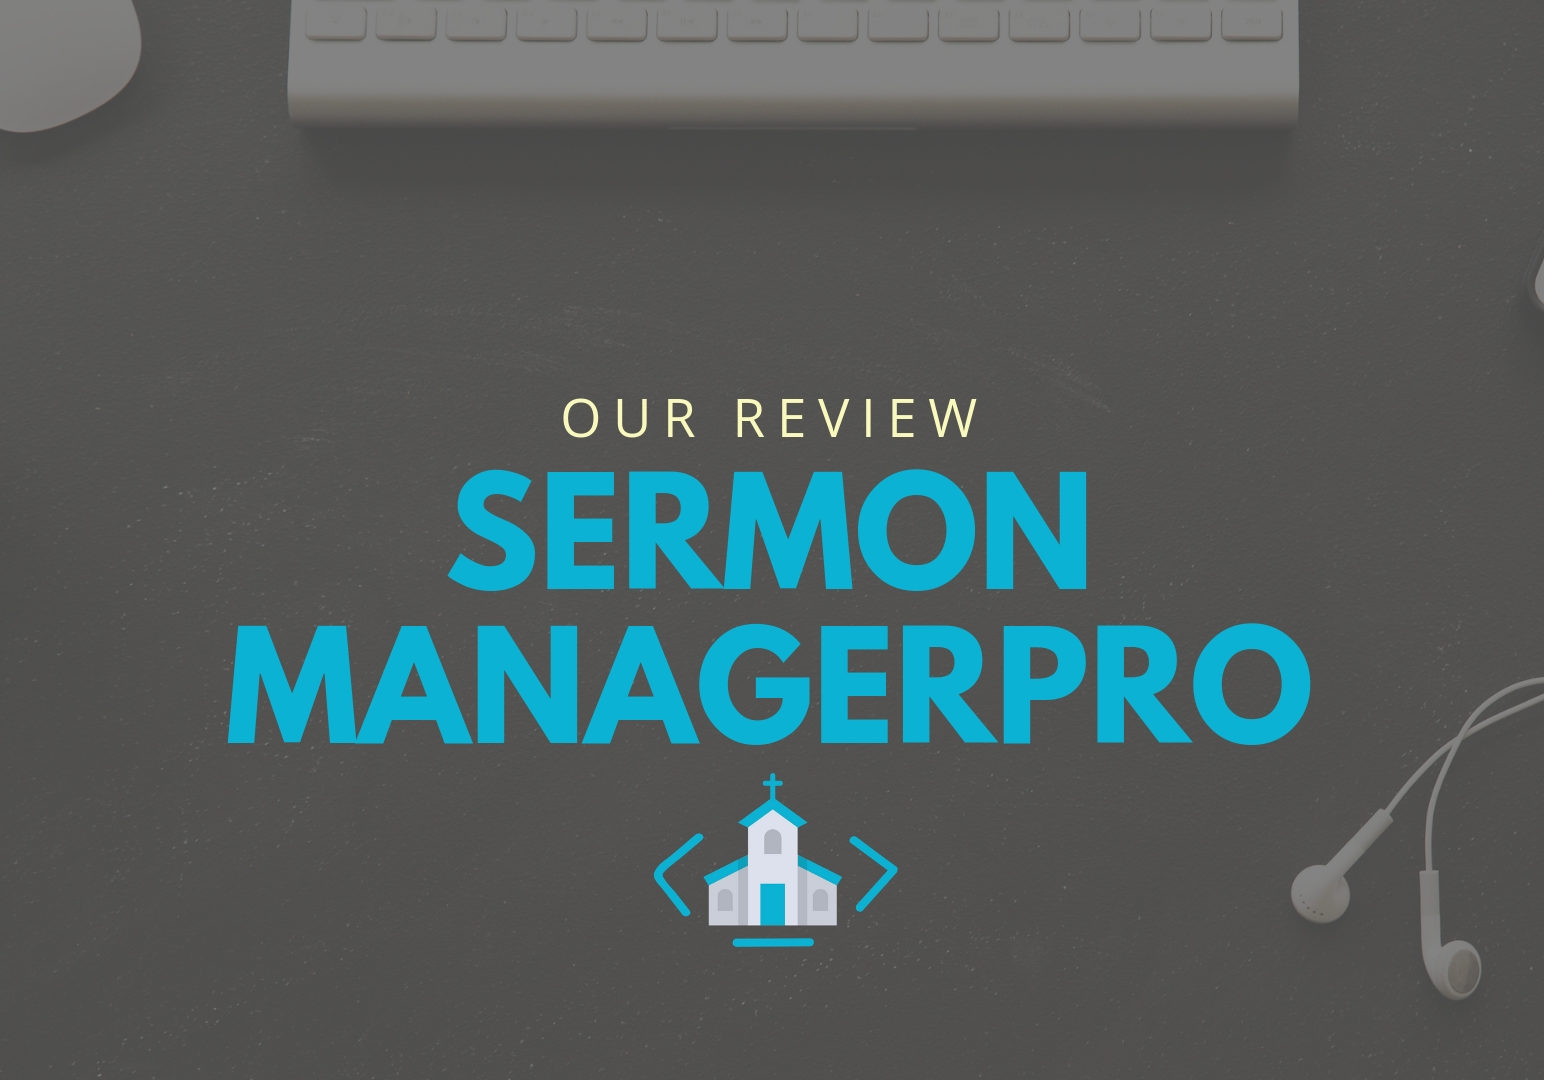 Review of Sermon Manager Pro